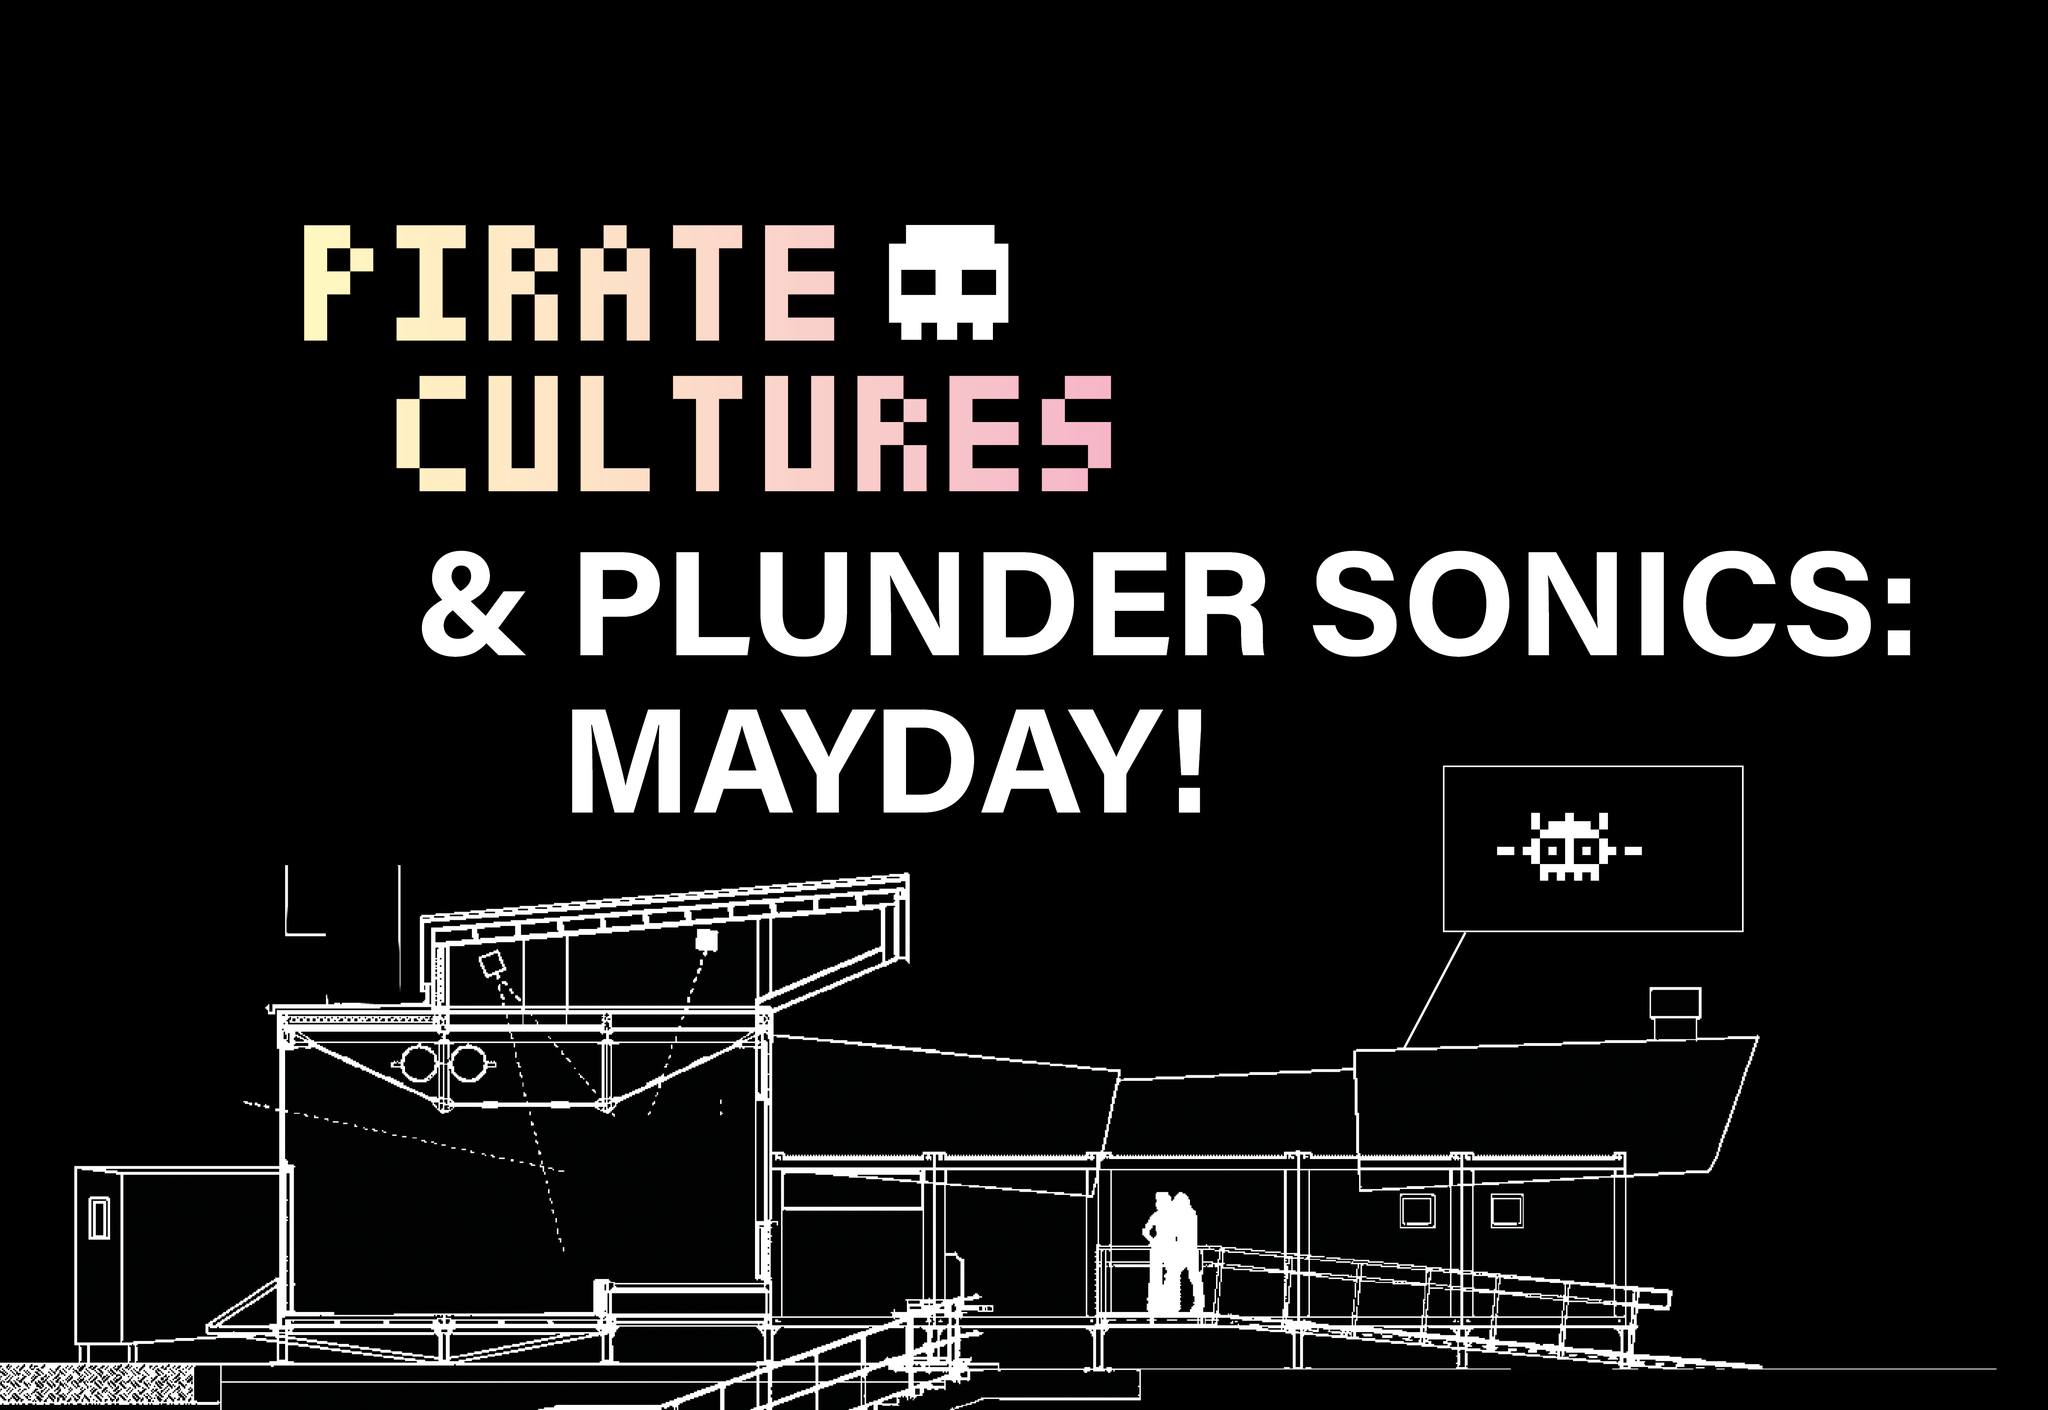 Pirate Cultures & Plunder Sonics am 1. May 2024 @ Flucc.